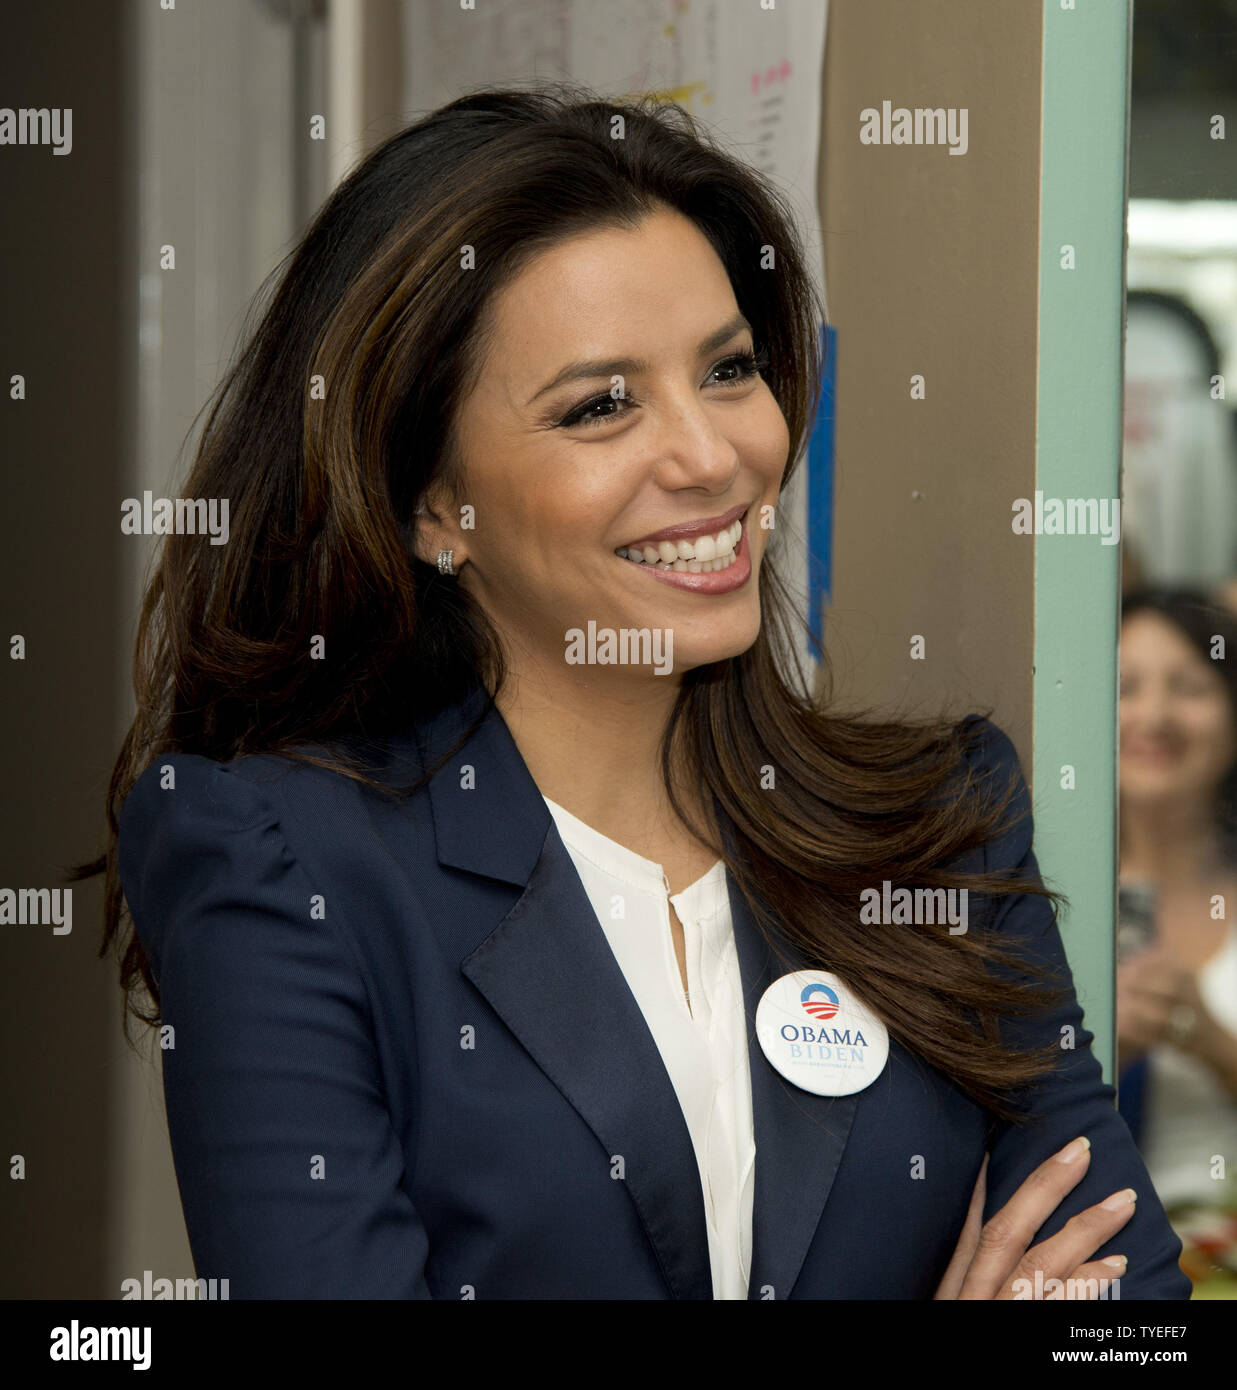 Eva Longoria talks to Obama supporters at the  West Palm Beach Florida, field office during the first day of early voting in Florida, October 27, 2012. Floridians can early vote starting Saturday October 27 through November 3, 2012  from 7A.M. to 7P.M. daily. UPI/Gary I Rothstein. Stock Photo